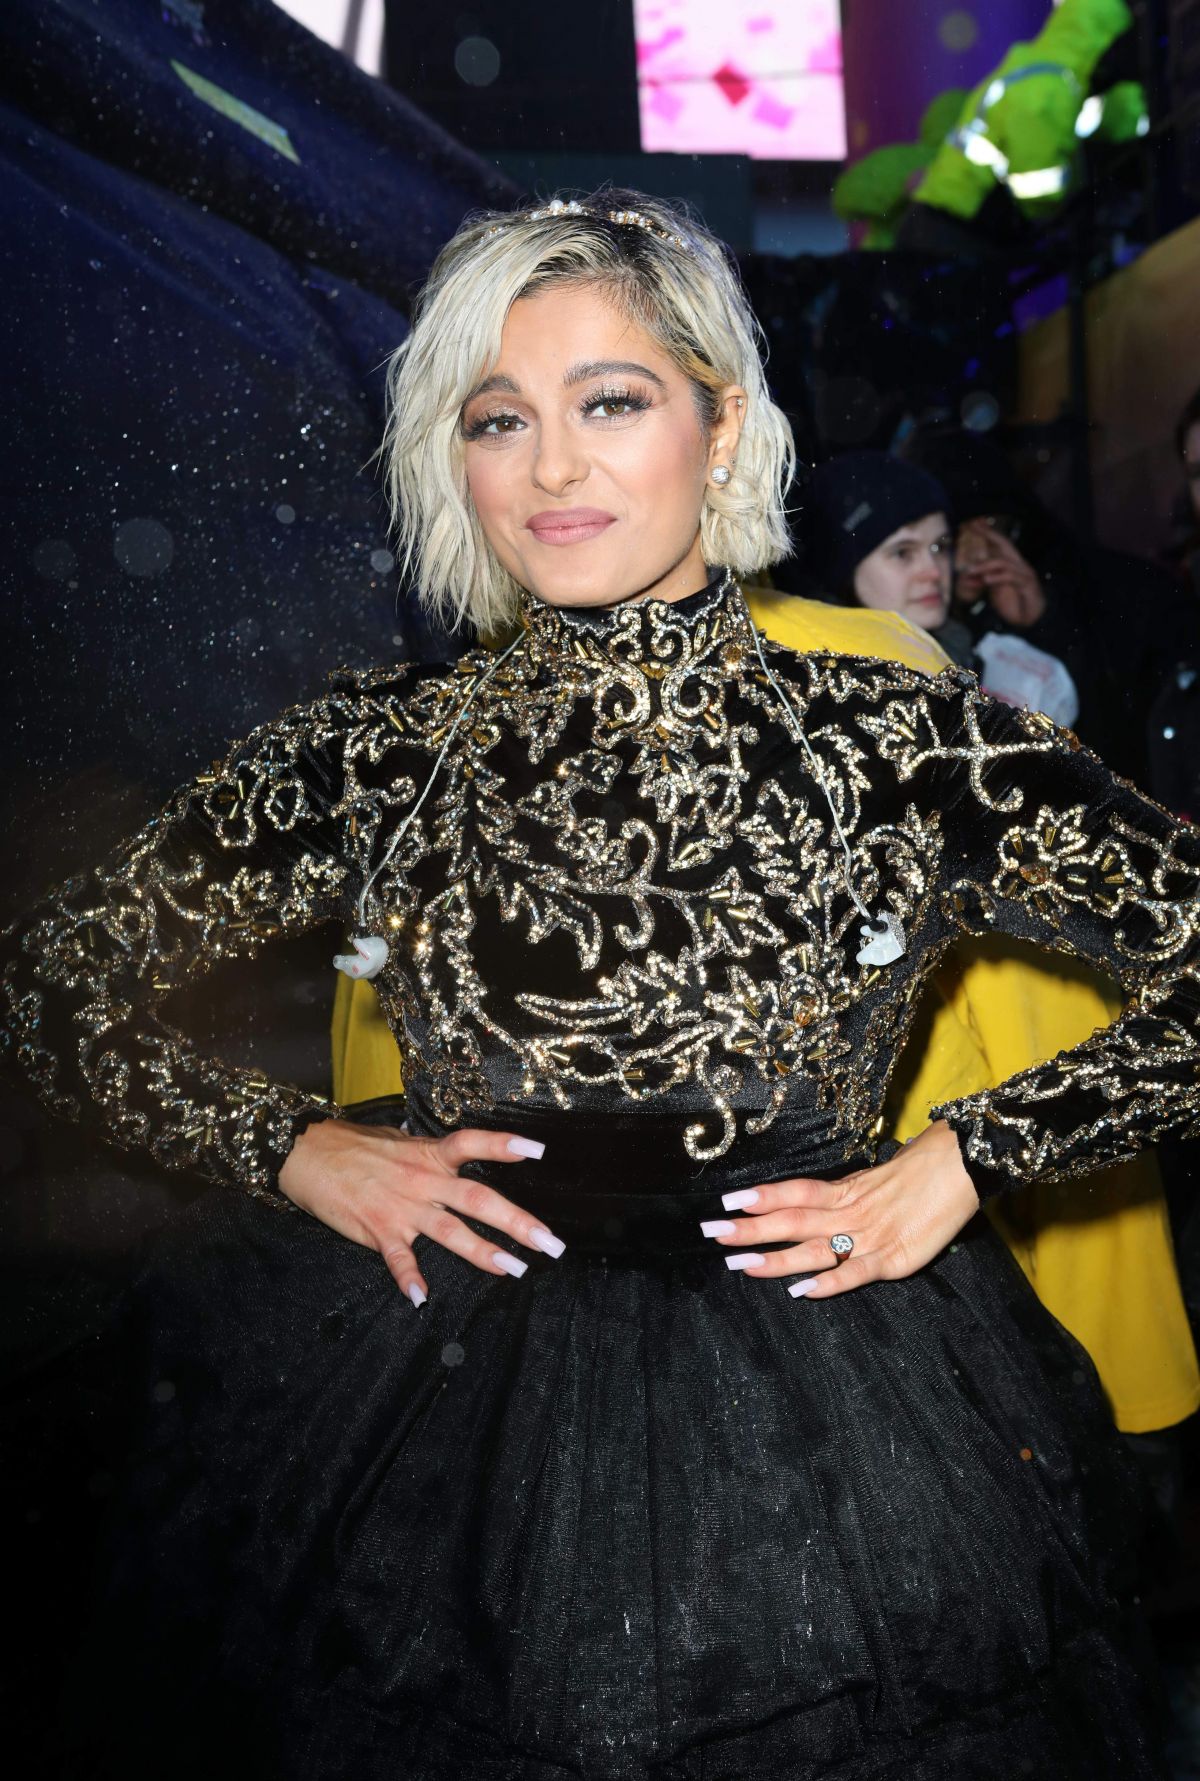 BEBE REXHA at New Year's Eve in New York 12/31/2018 ...